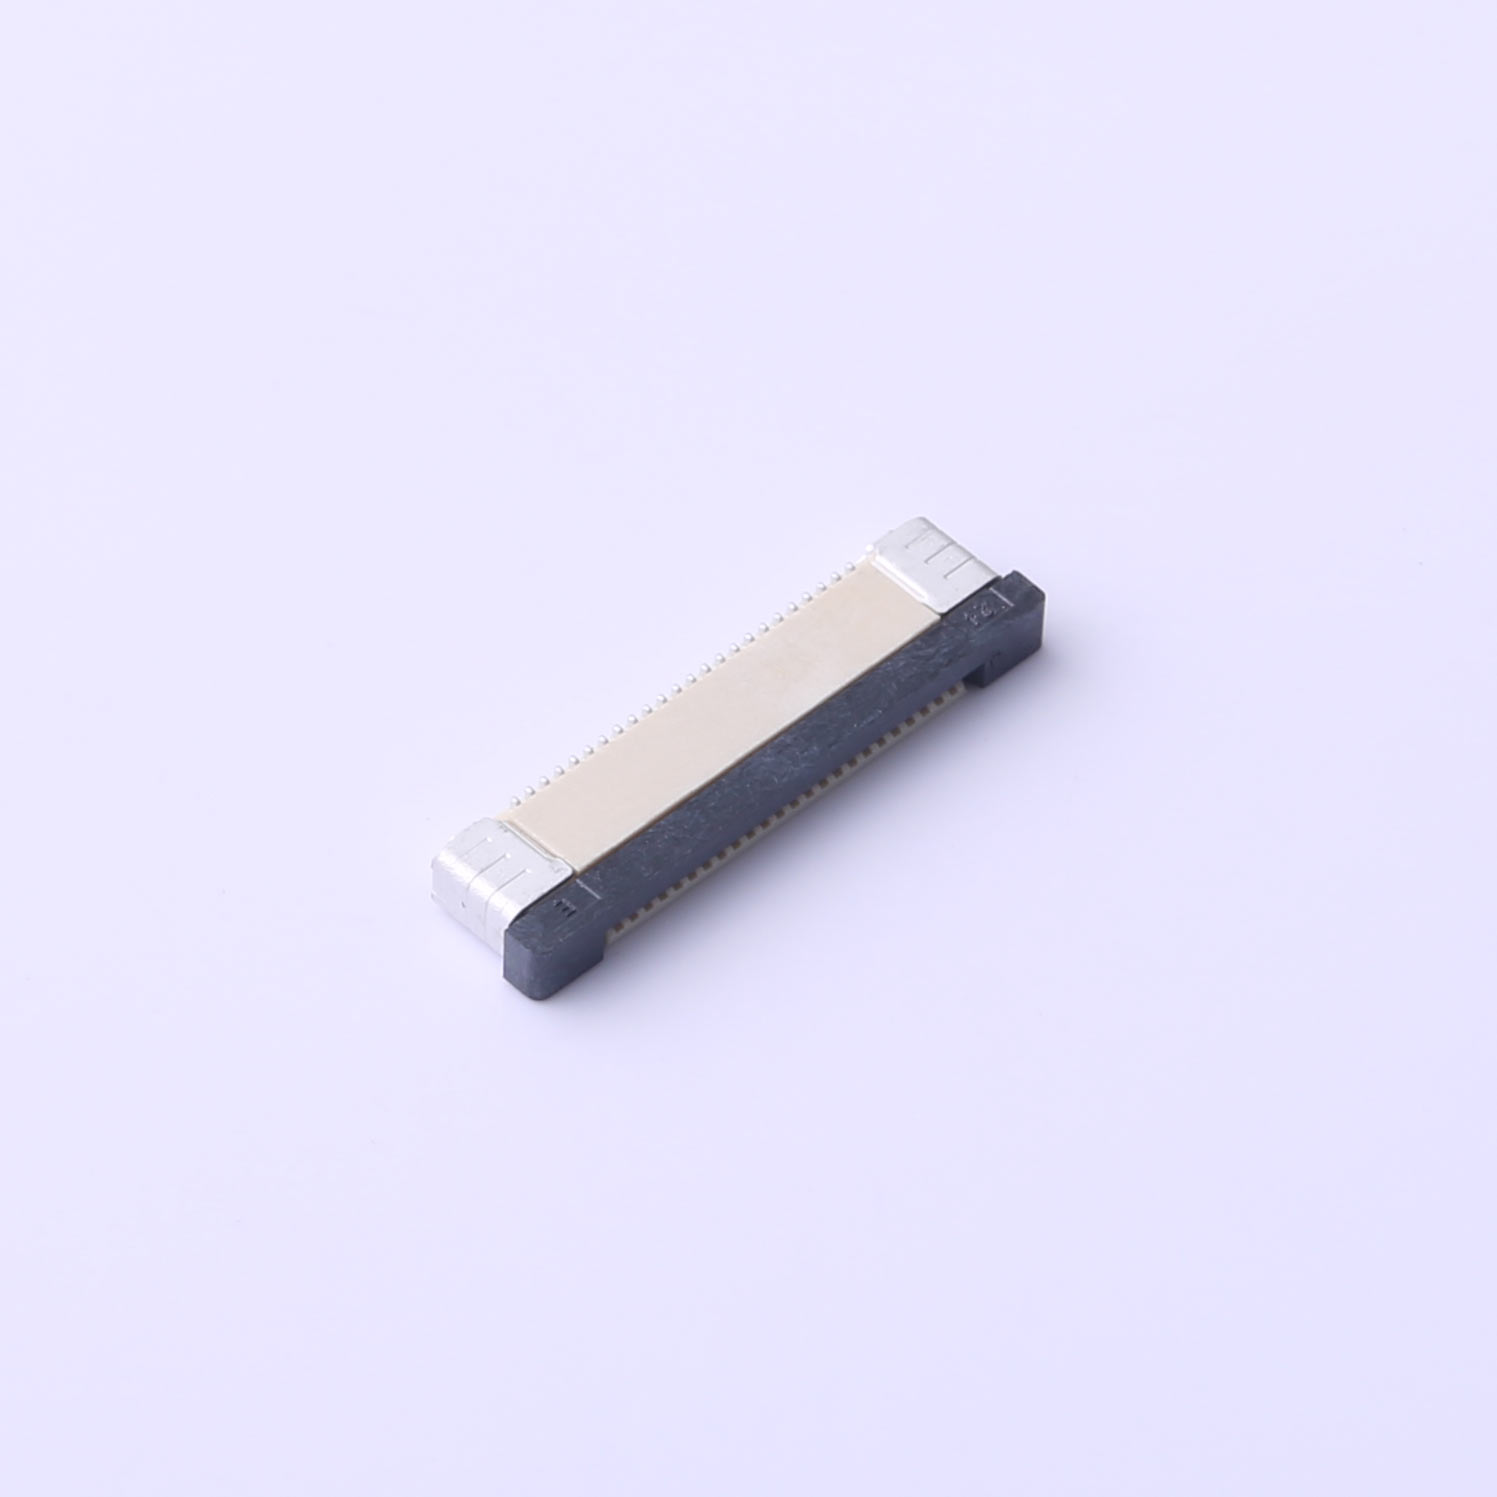 Kinghelm FFC/FPC connector  0.5mm 24pin H2.0mm - KH-CL0.5-H2.0-24pin